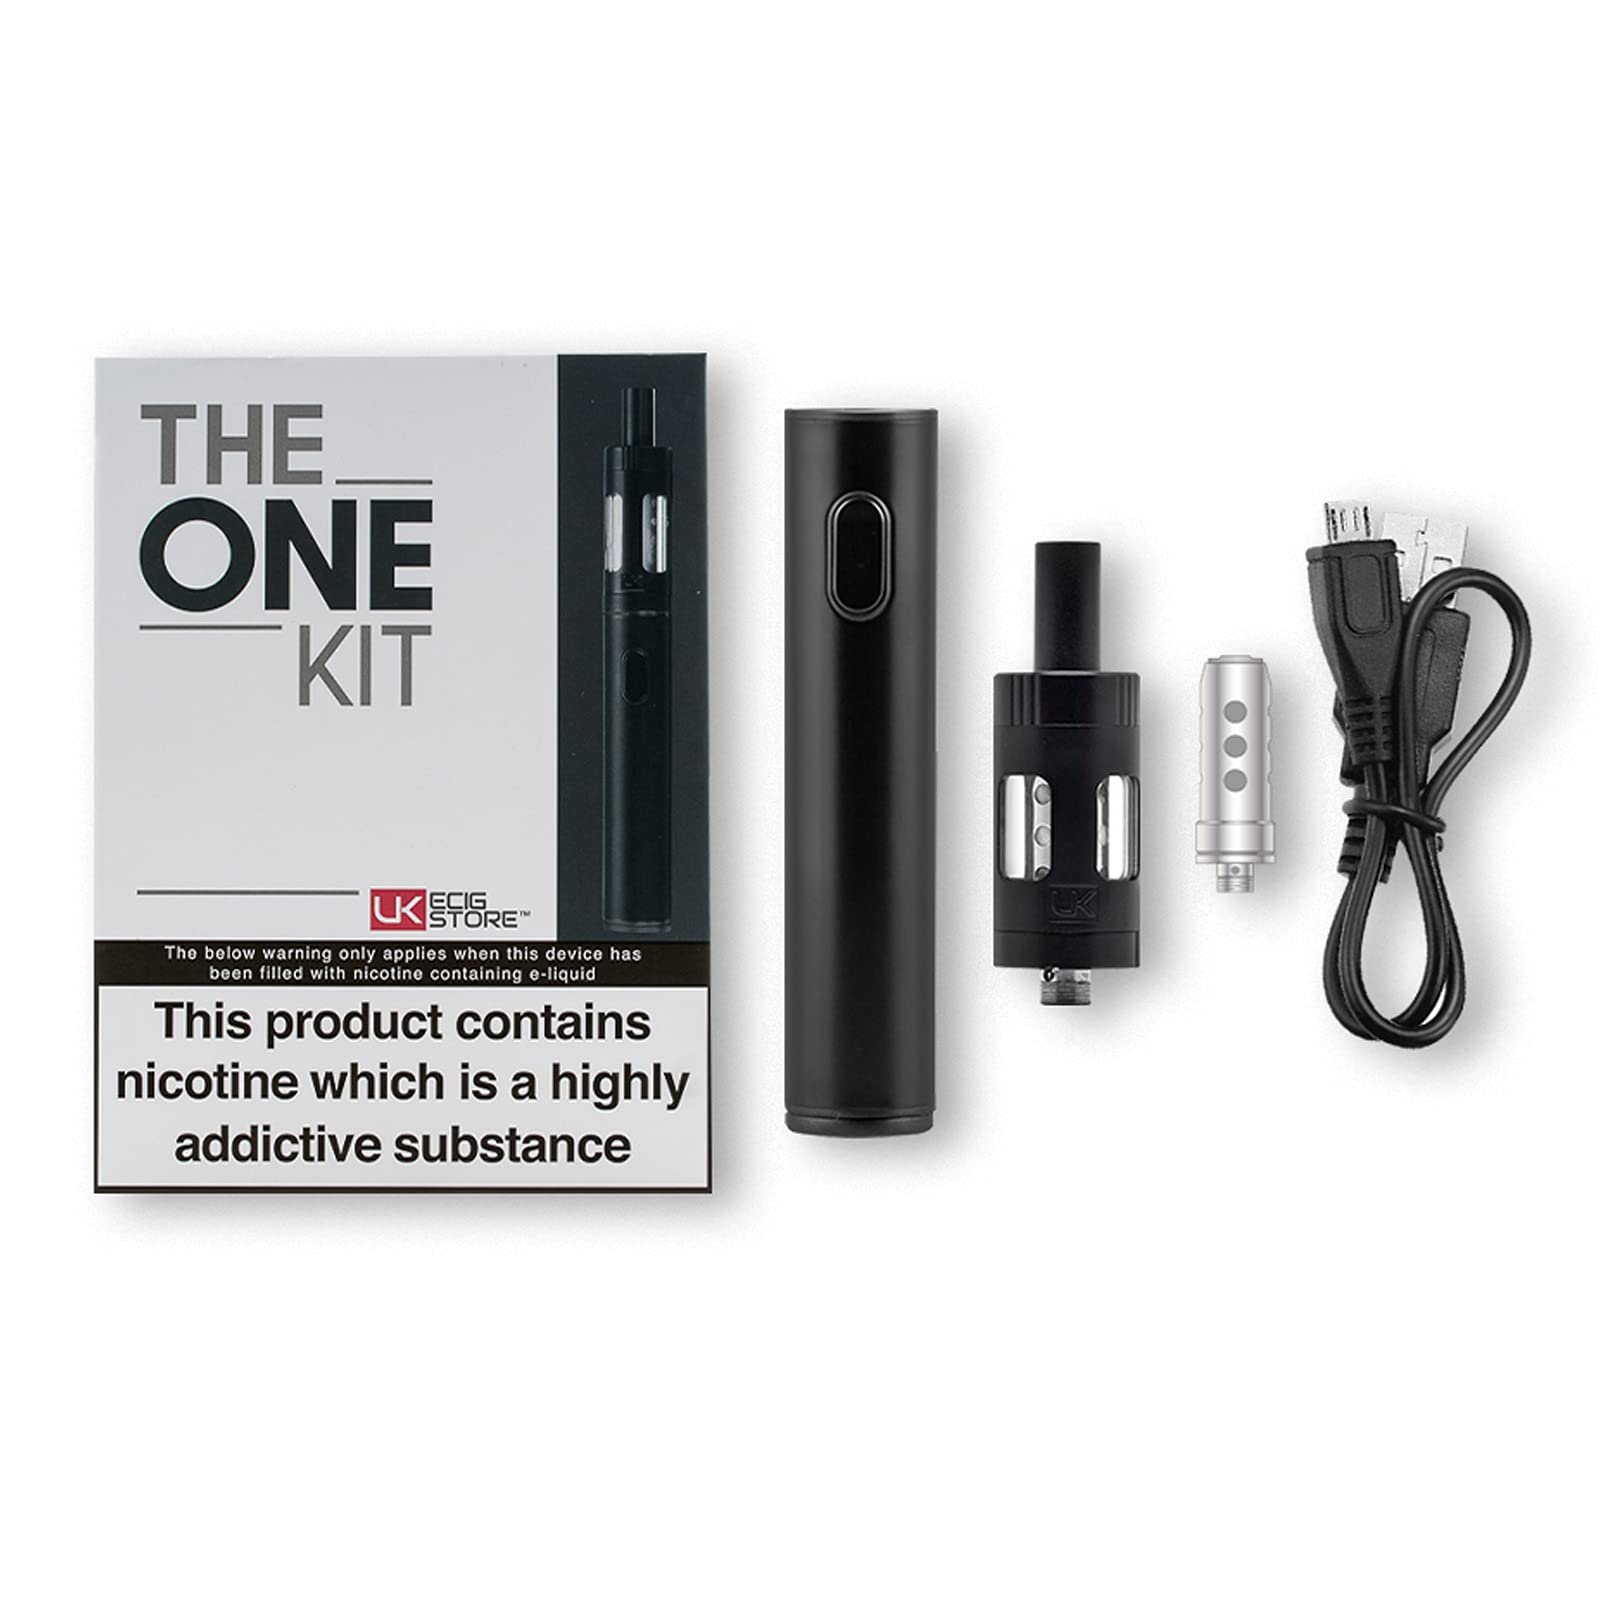 This image shows a vape kit that is safety regulated and is used by Quit Well Newham to help residents over 18 to stop smoking